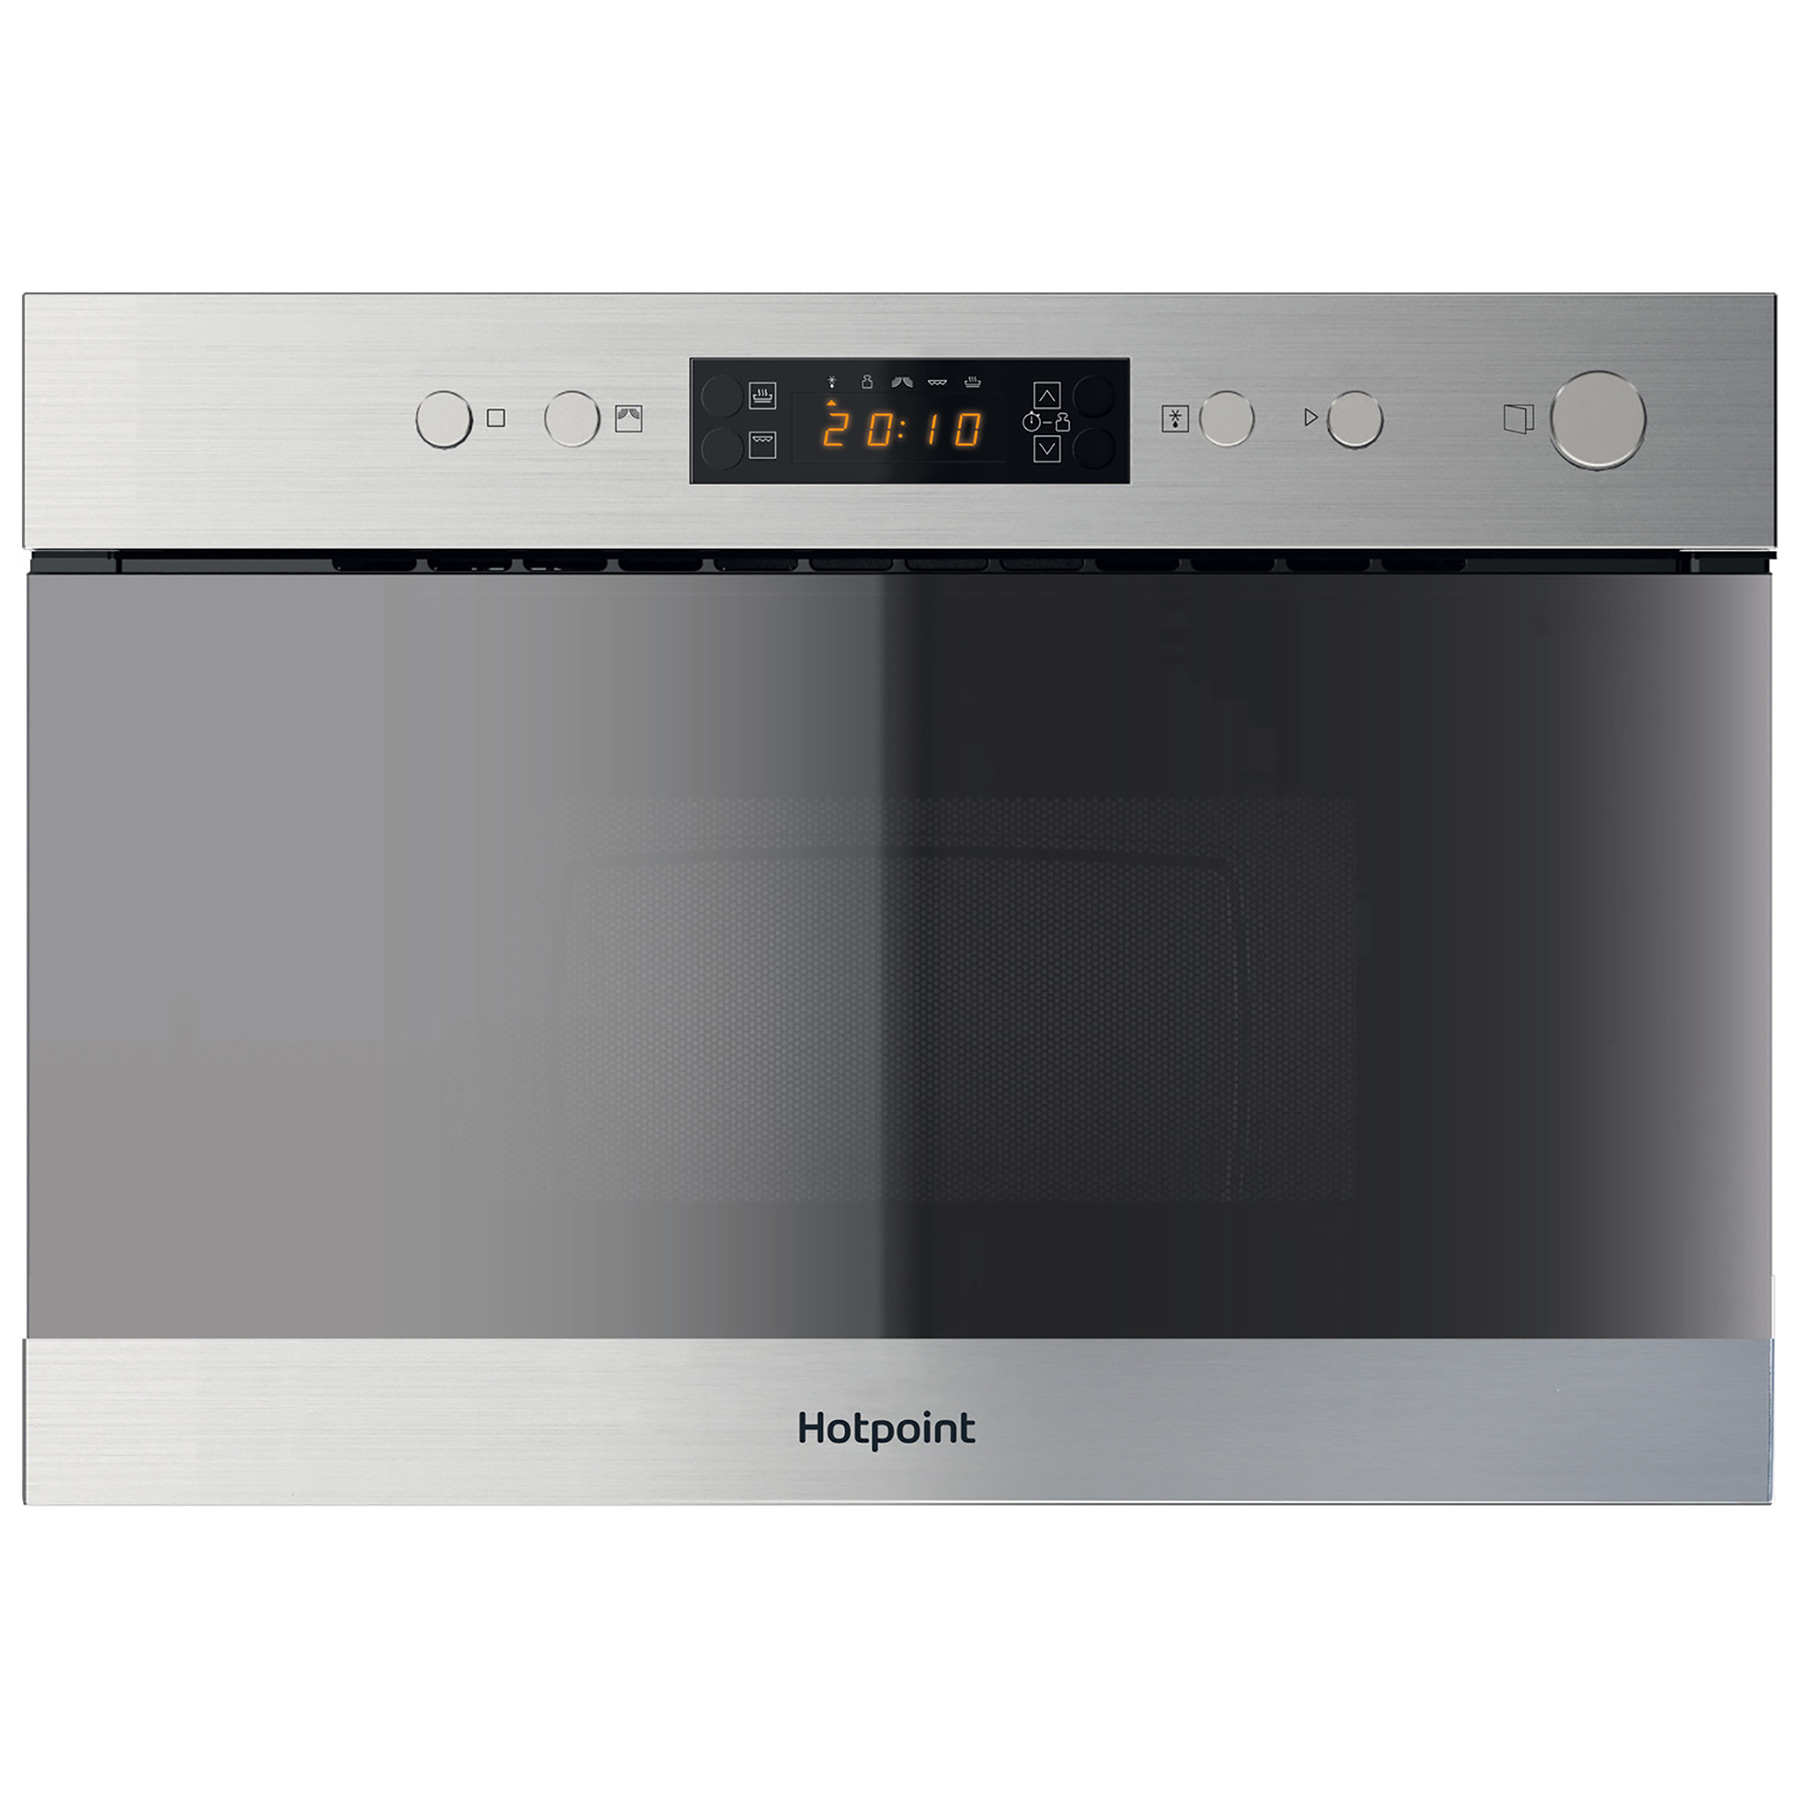 Hotpoint MN314IXH Built In Microwave Oven with Grill in St Steel 750W